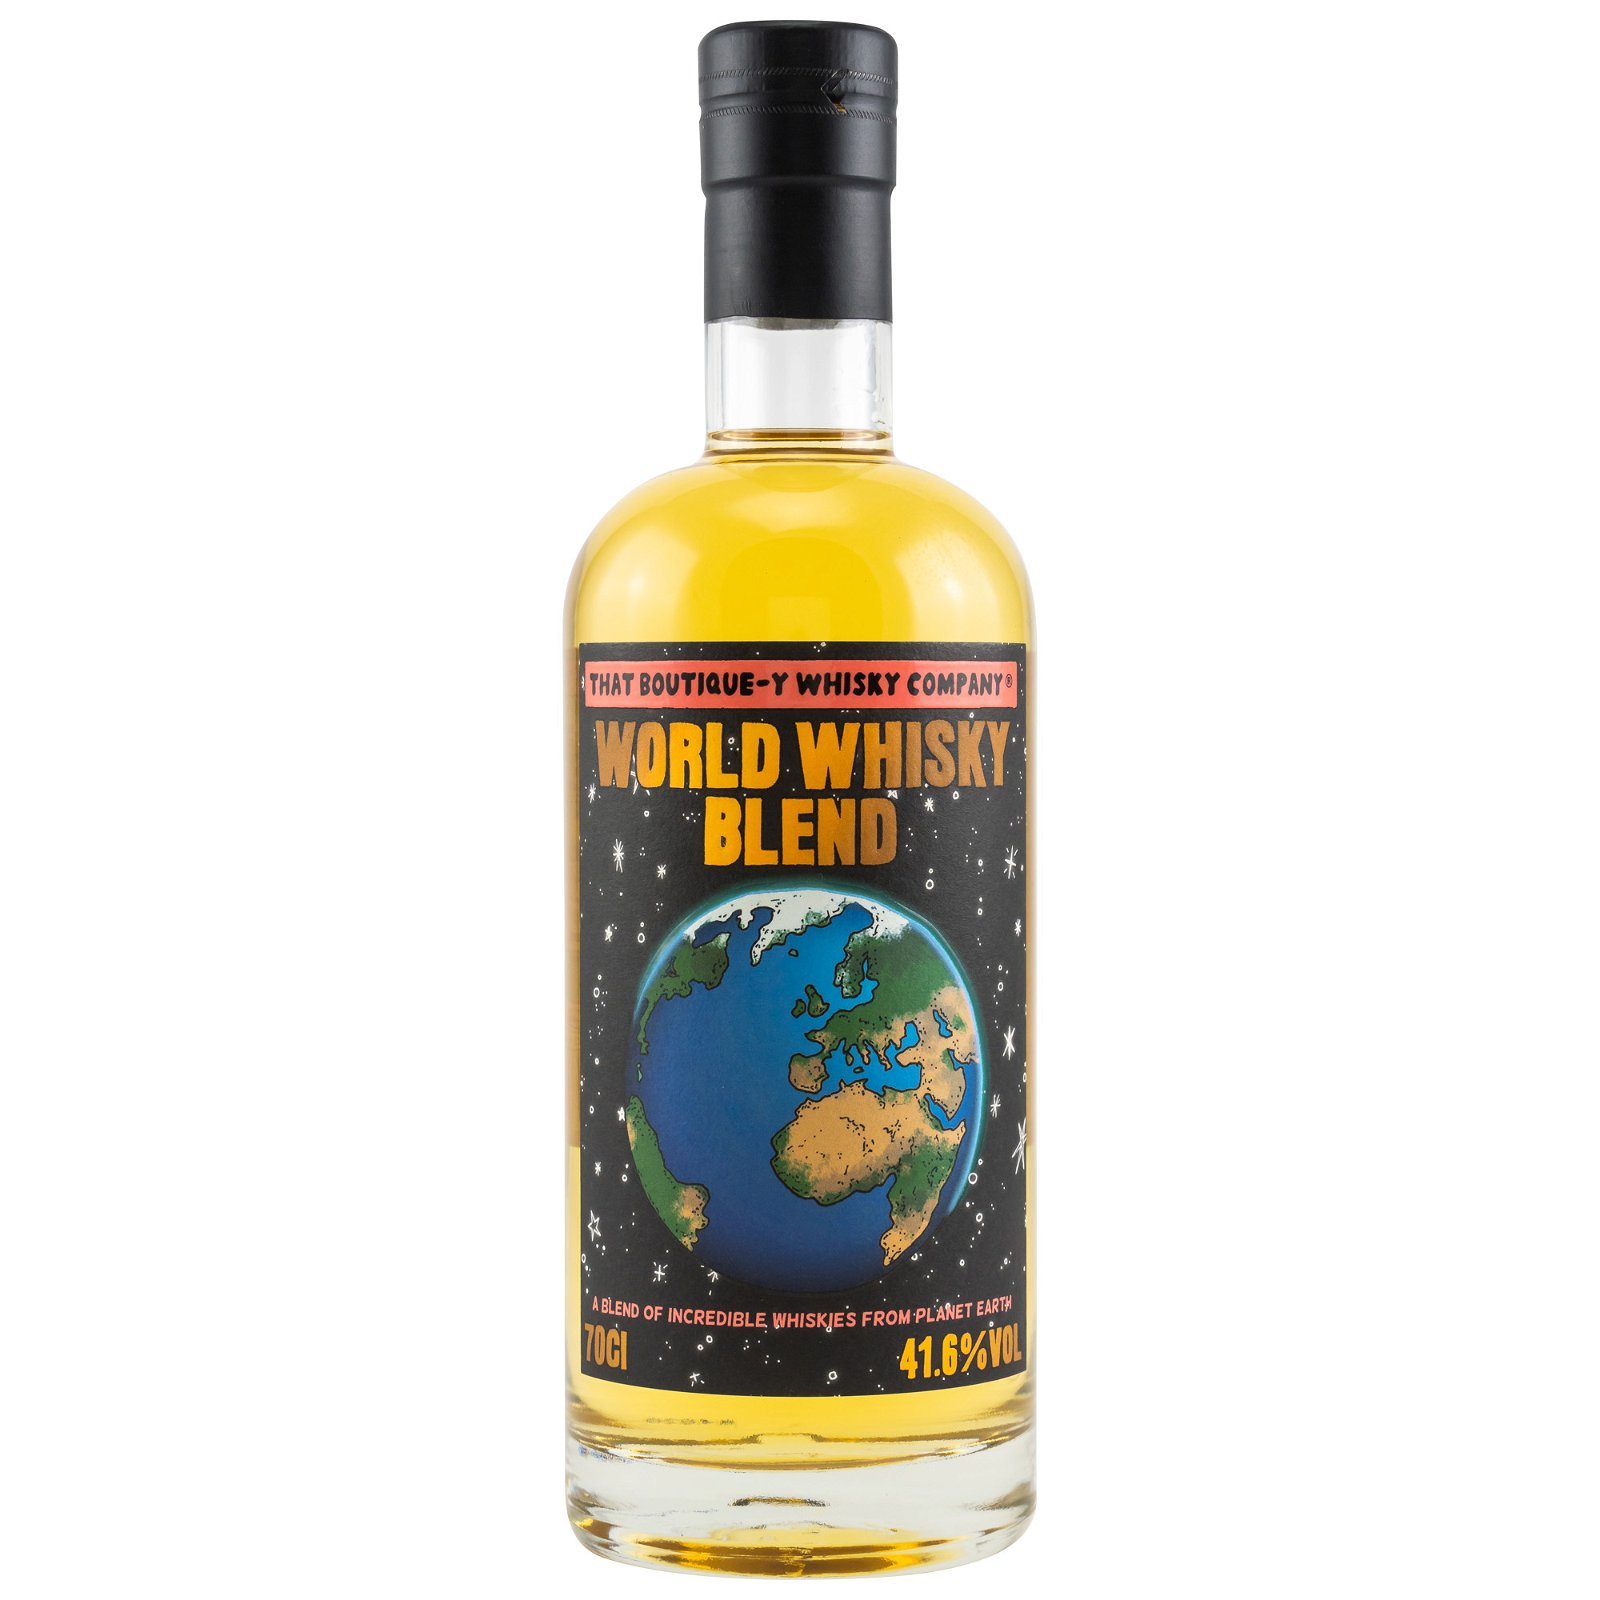 World Whisky Blend (That Boutique-Y Whisky Company)